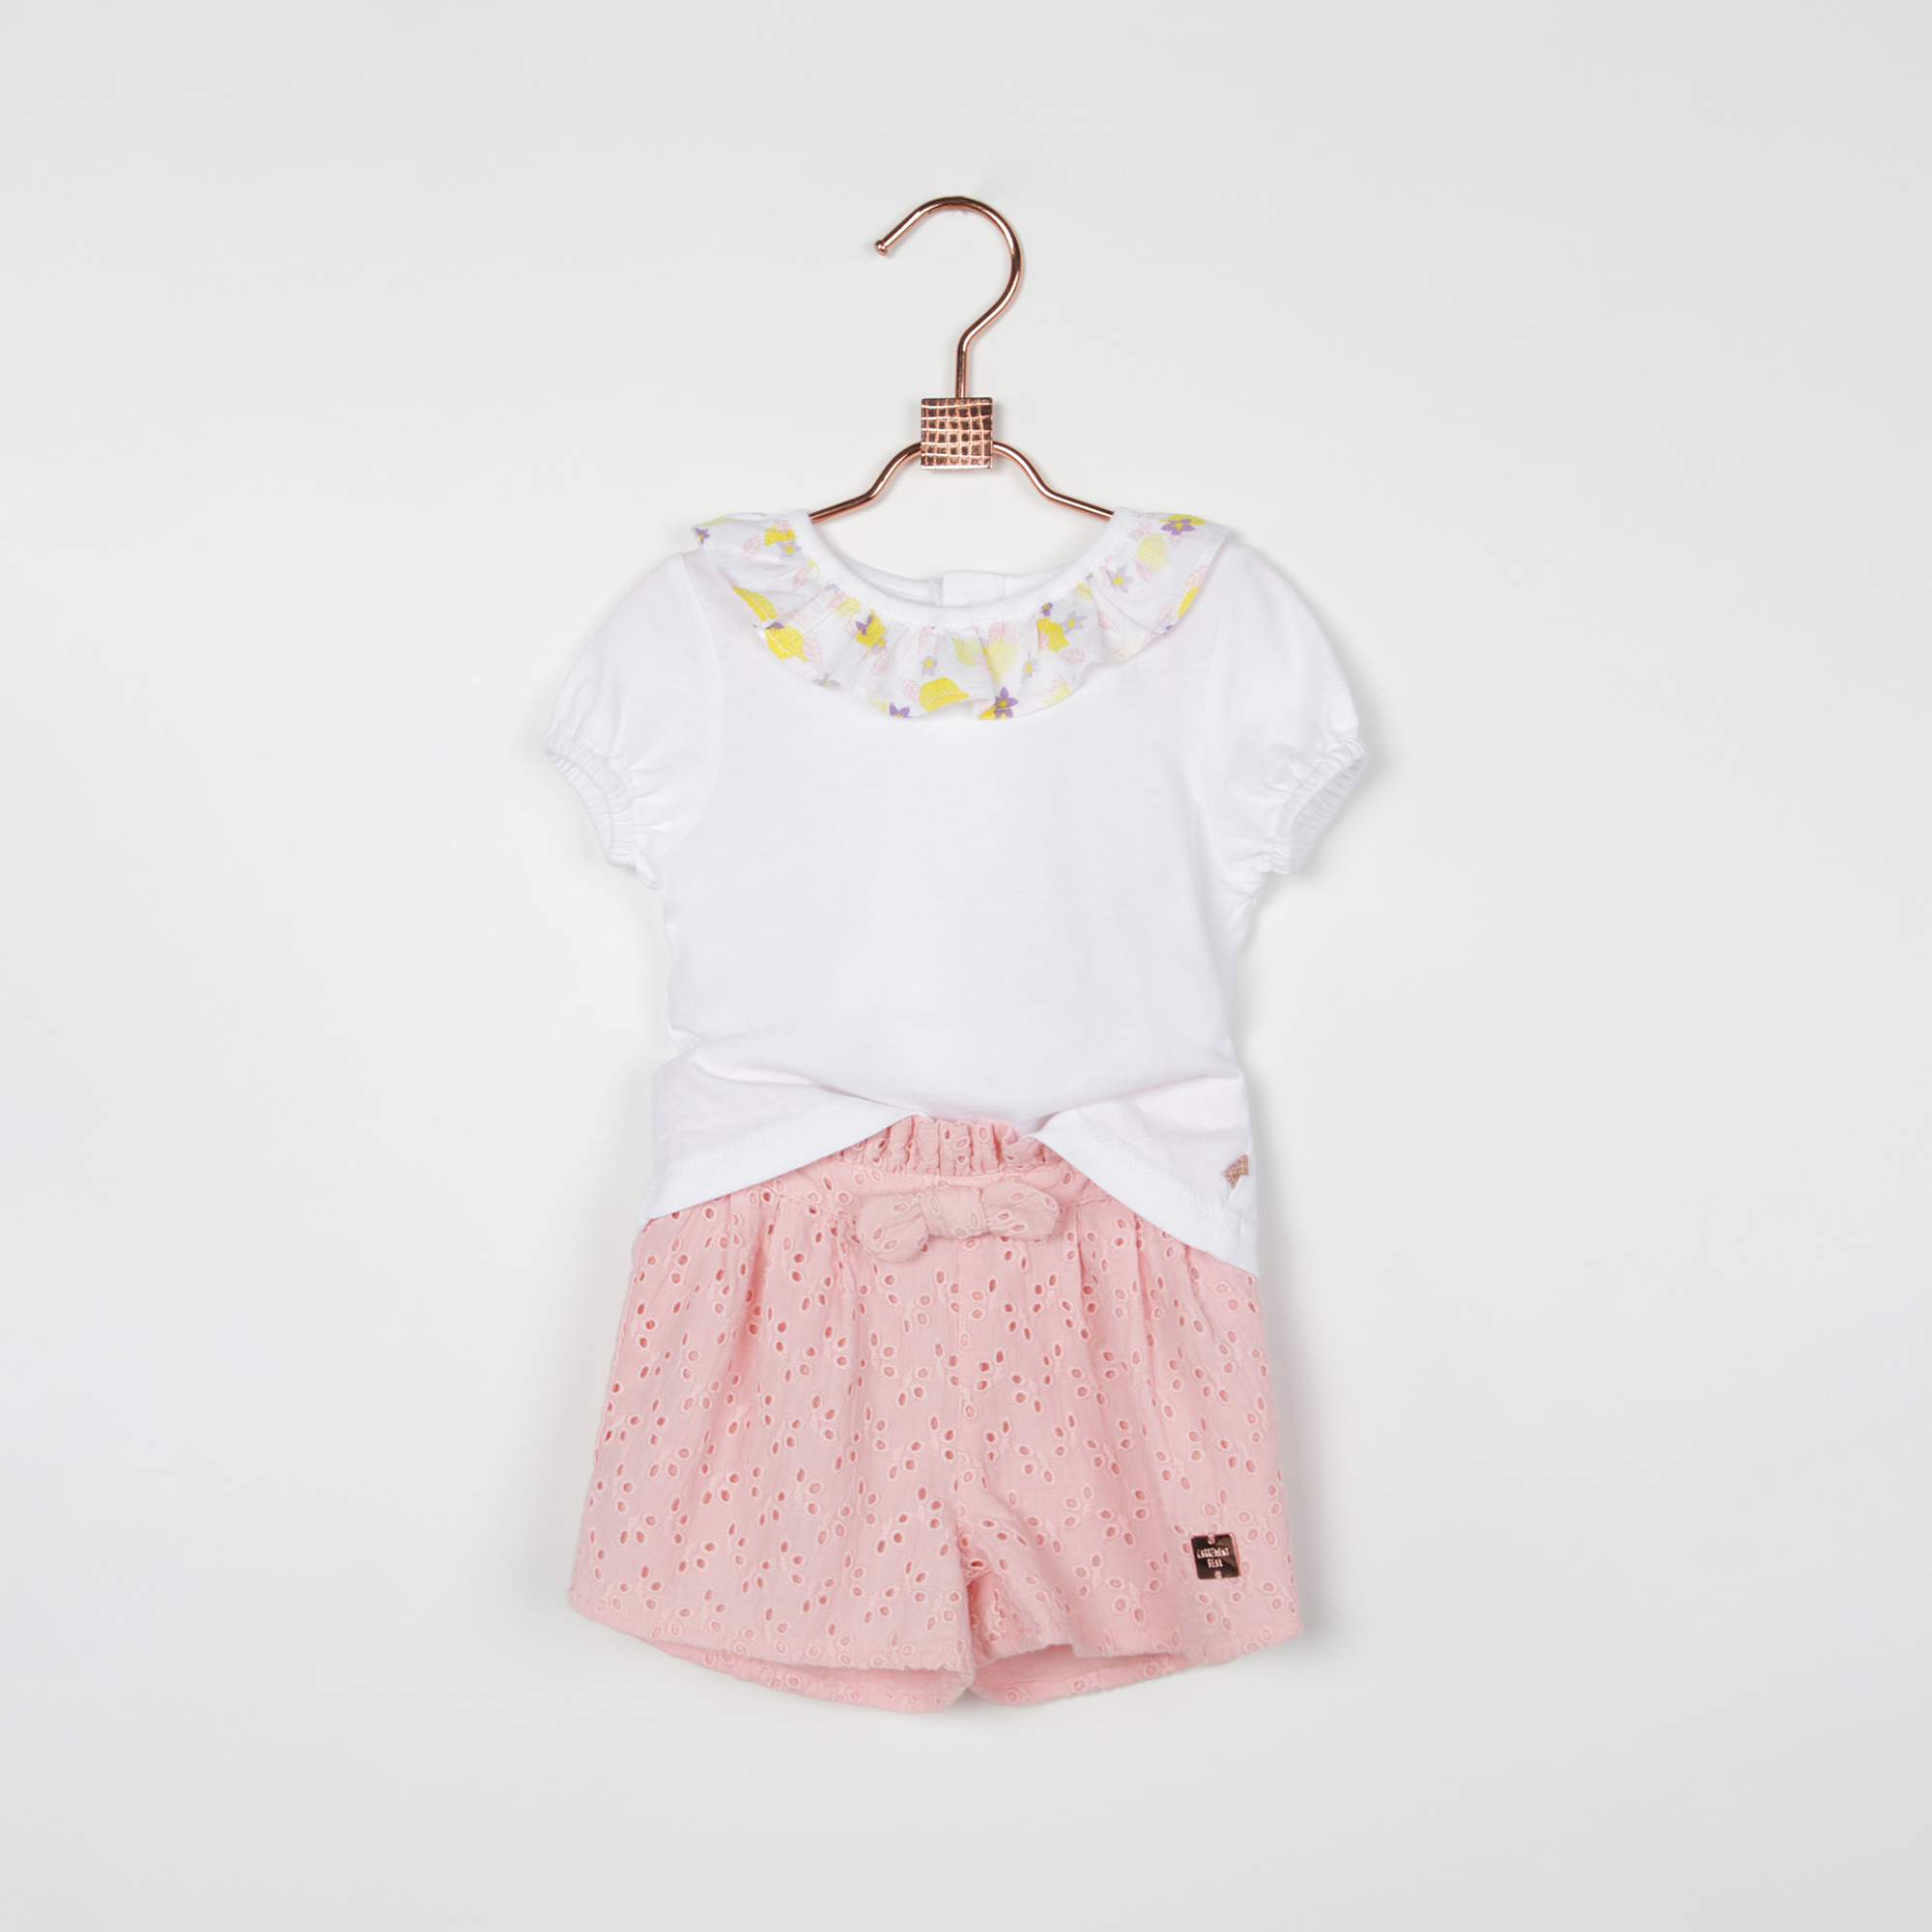 Cotton T-shirt with frill CARREMENT BEAU for GIRL